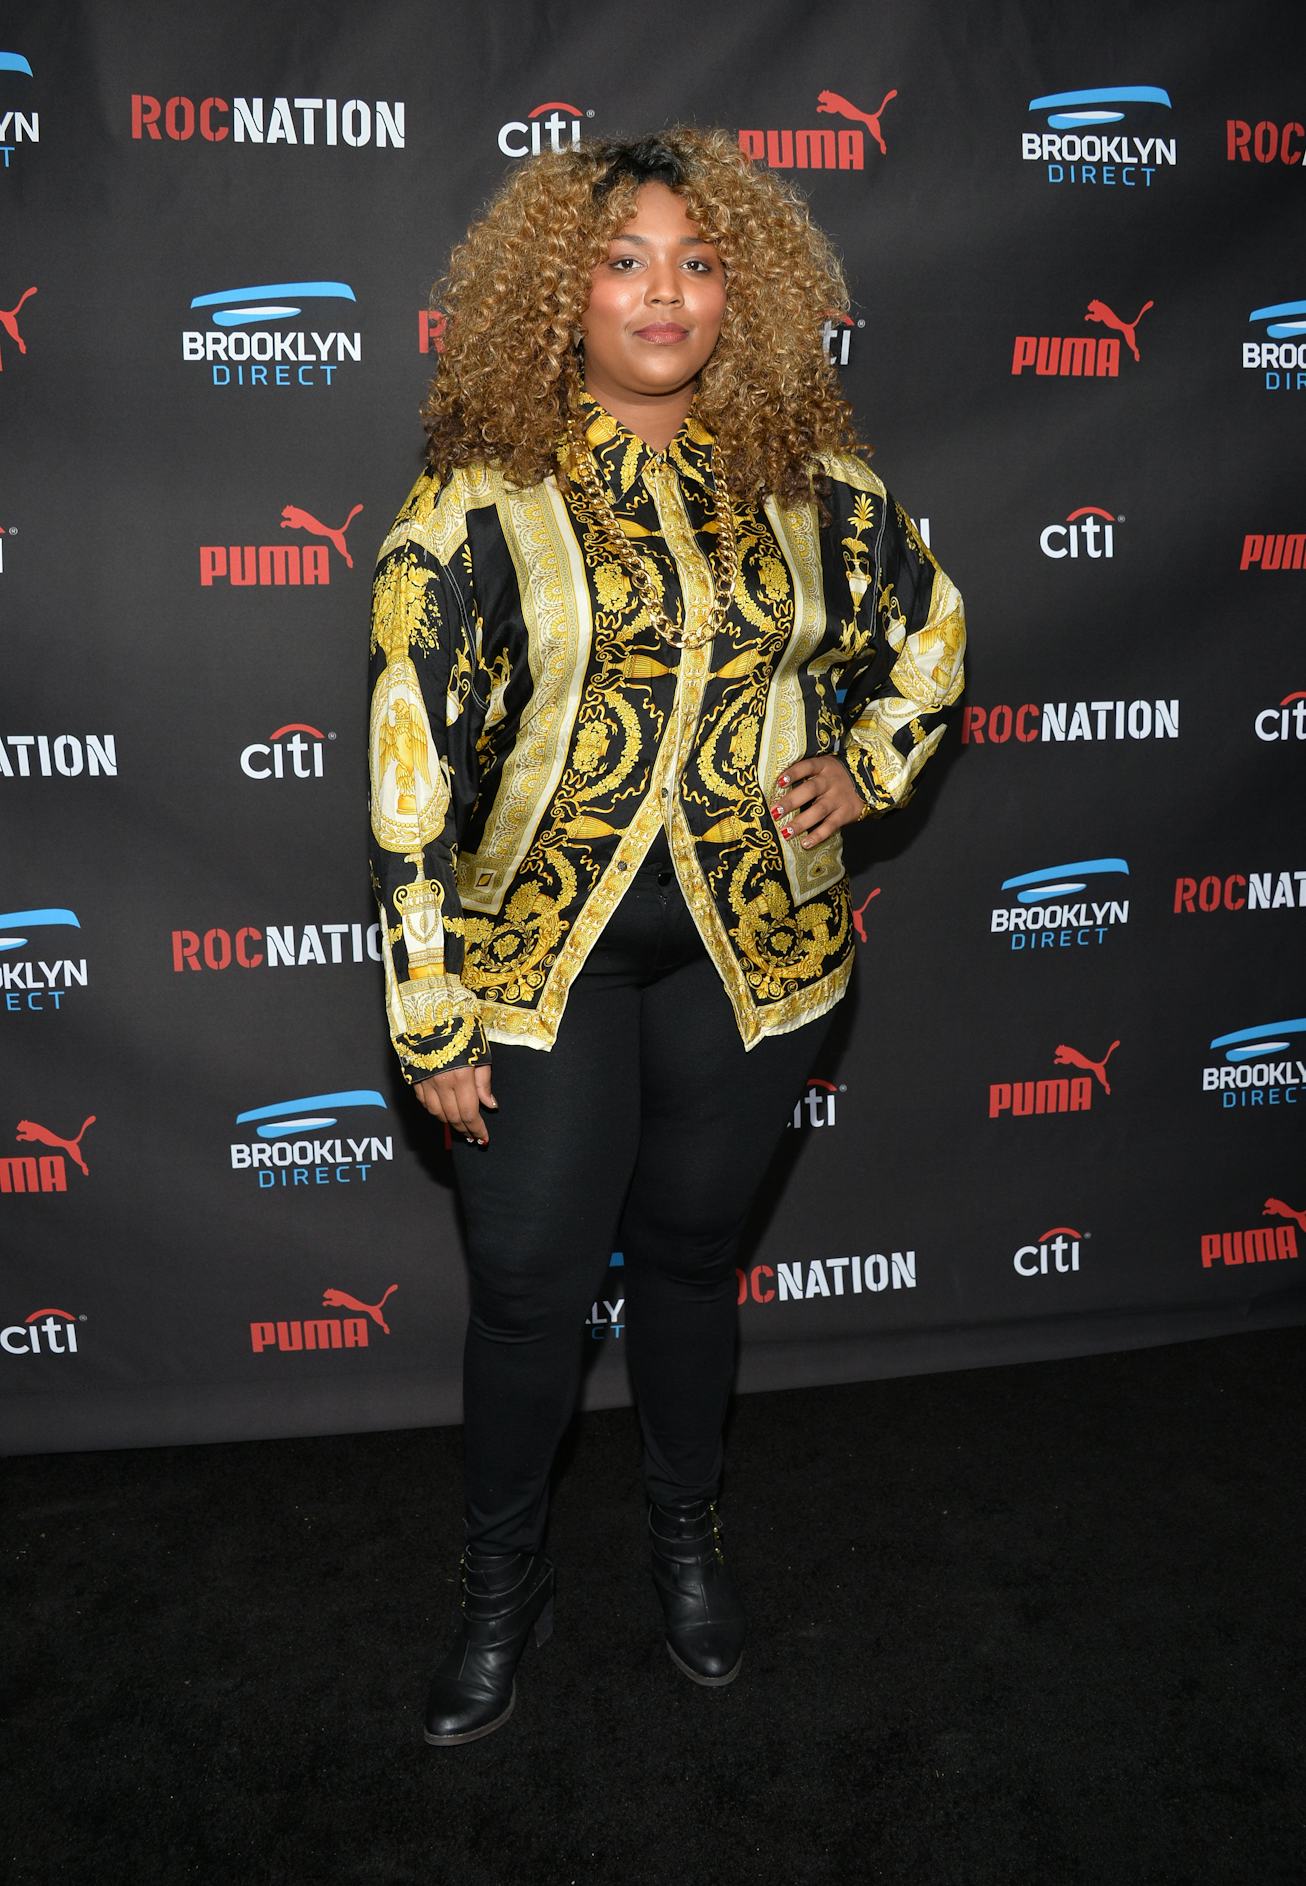 Lizzo at the Roc Nation Grammy Brunch in 2015.